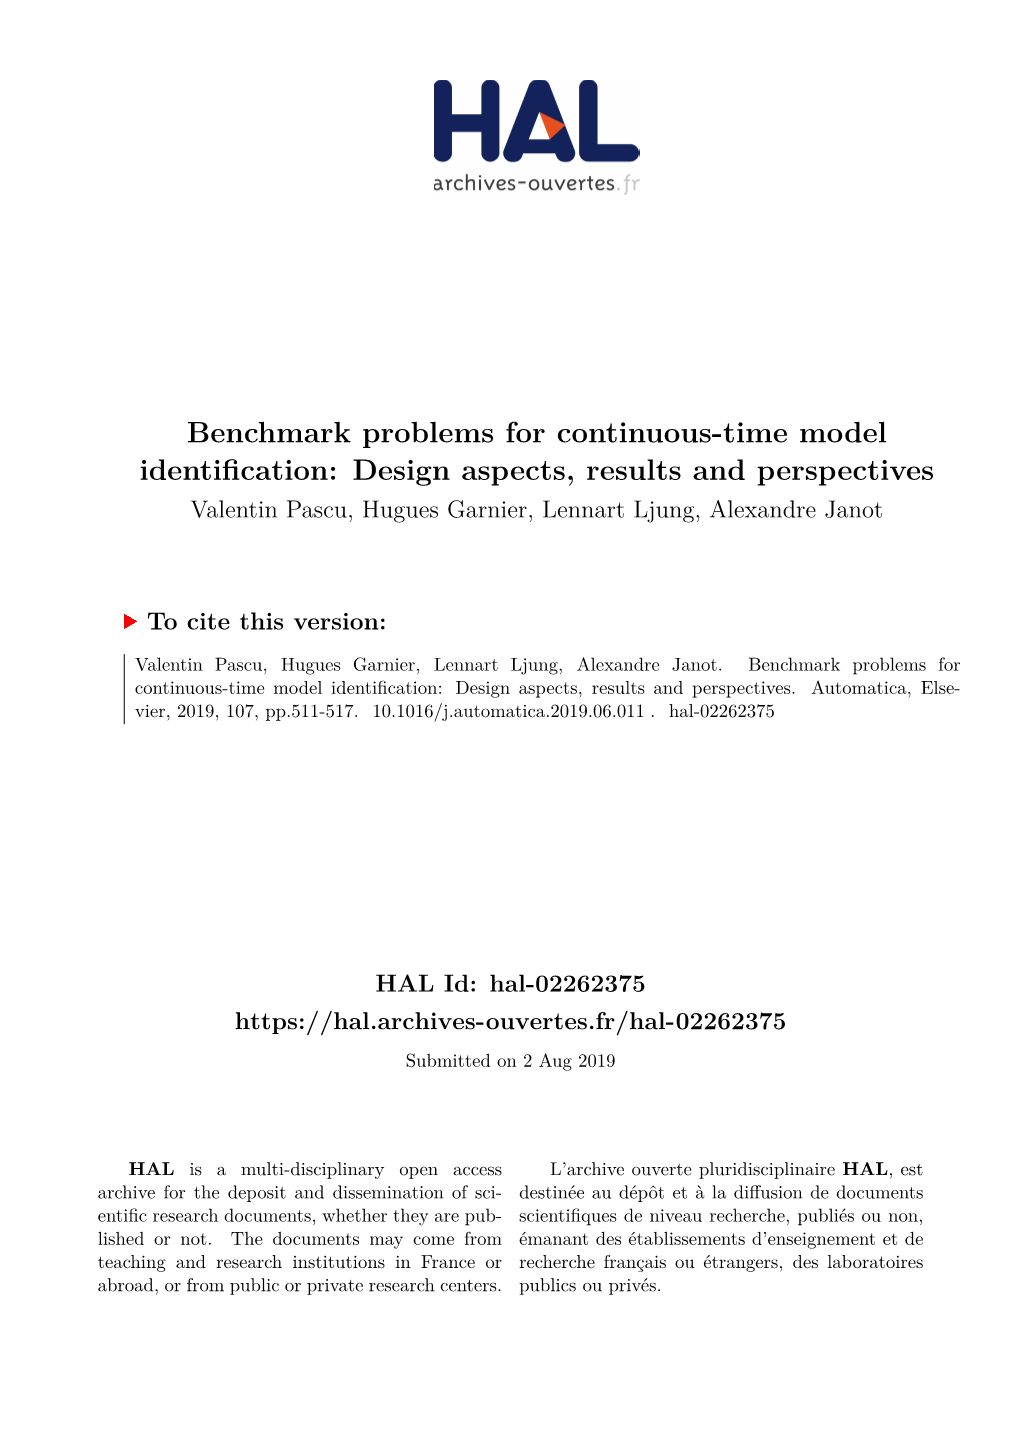 Benchmark Problems for Continuous-Time Model Identification: Design Aspects, Results and Perspectives Valentin Pascu, Hugues Garnier, Lennart Ljung, Alexandre Janot